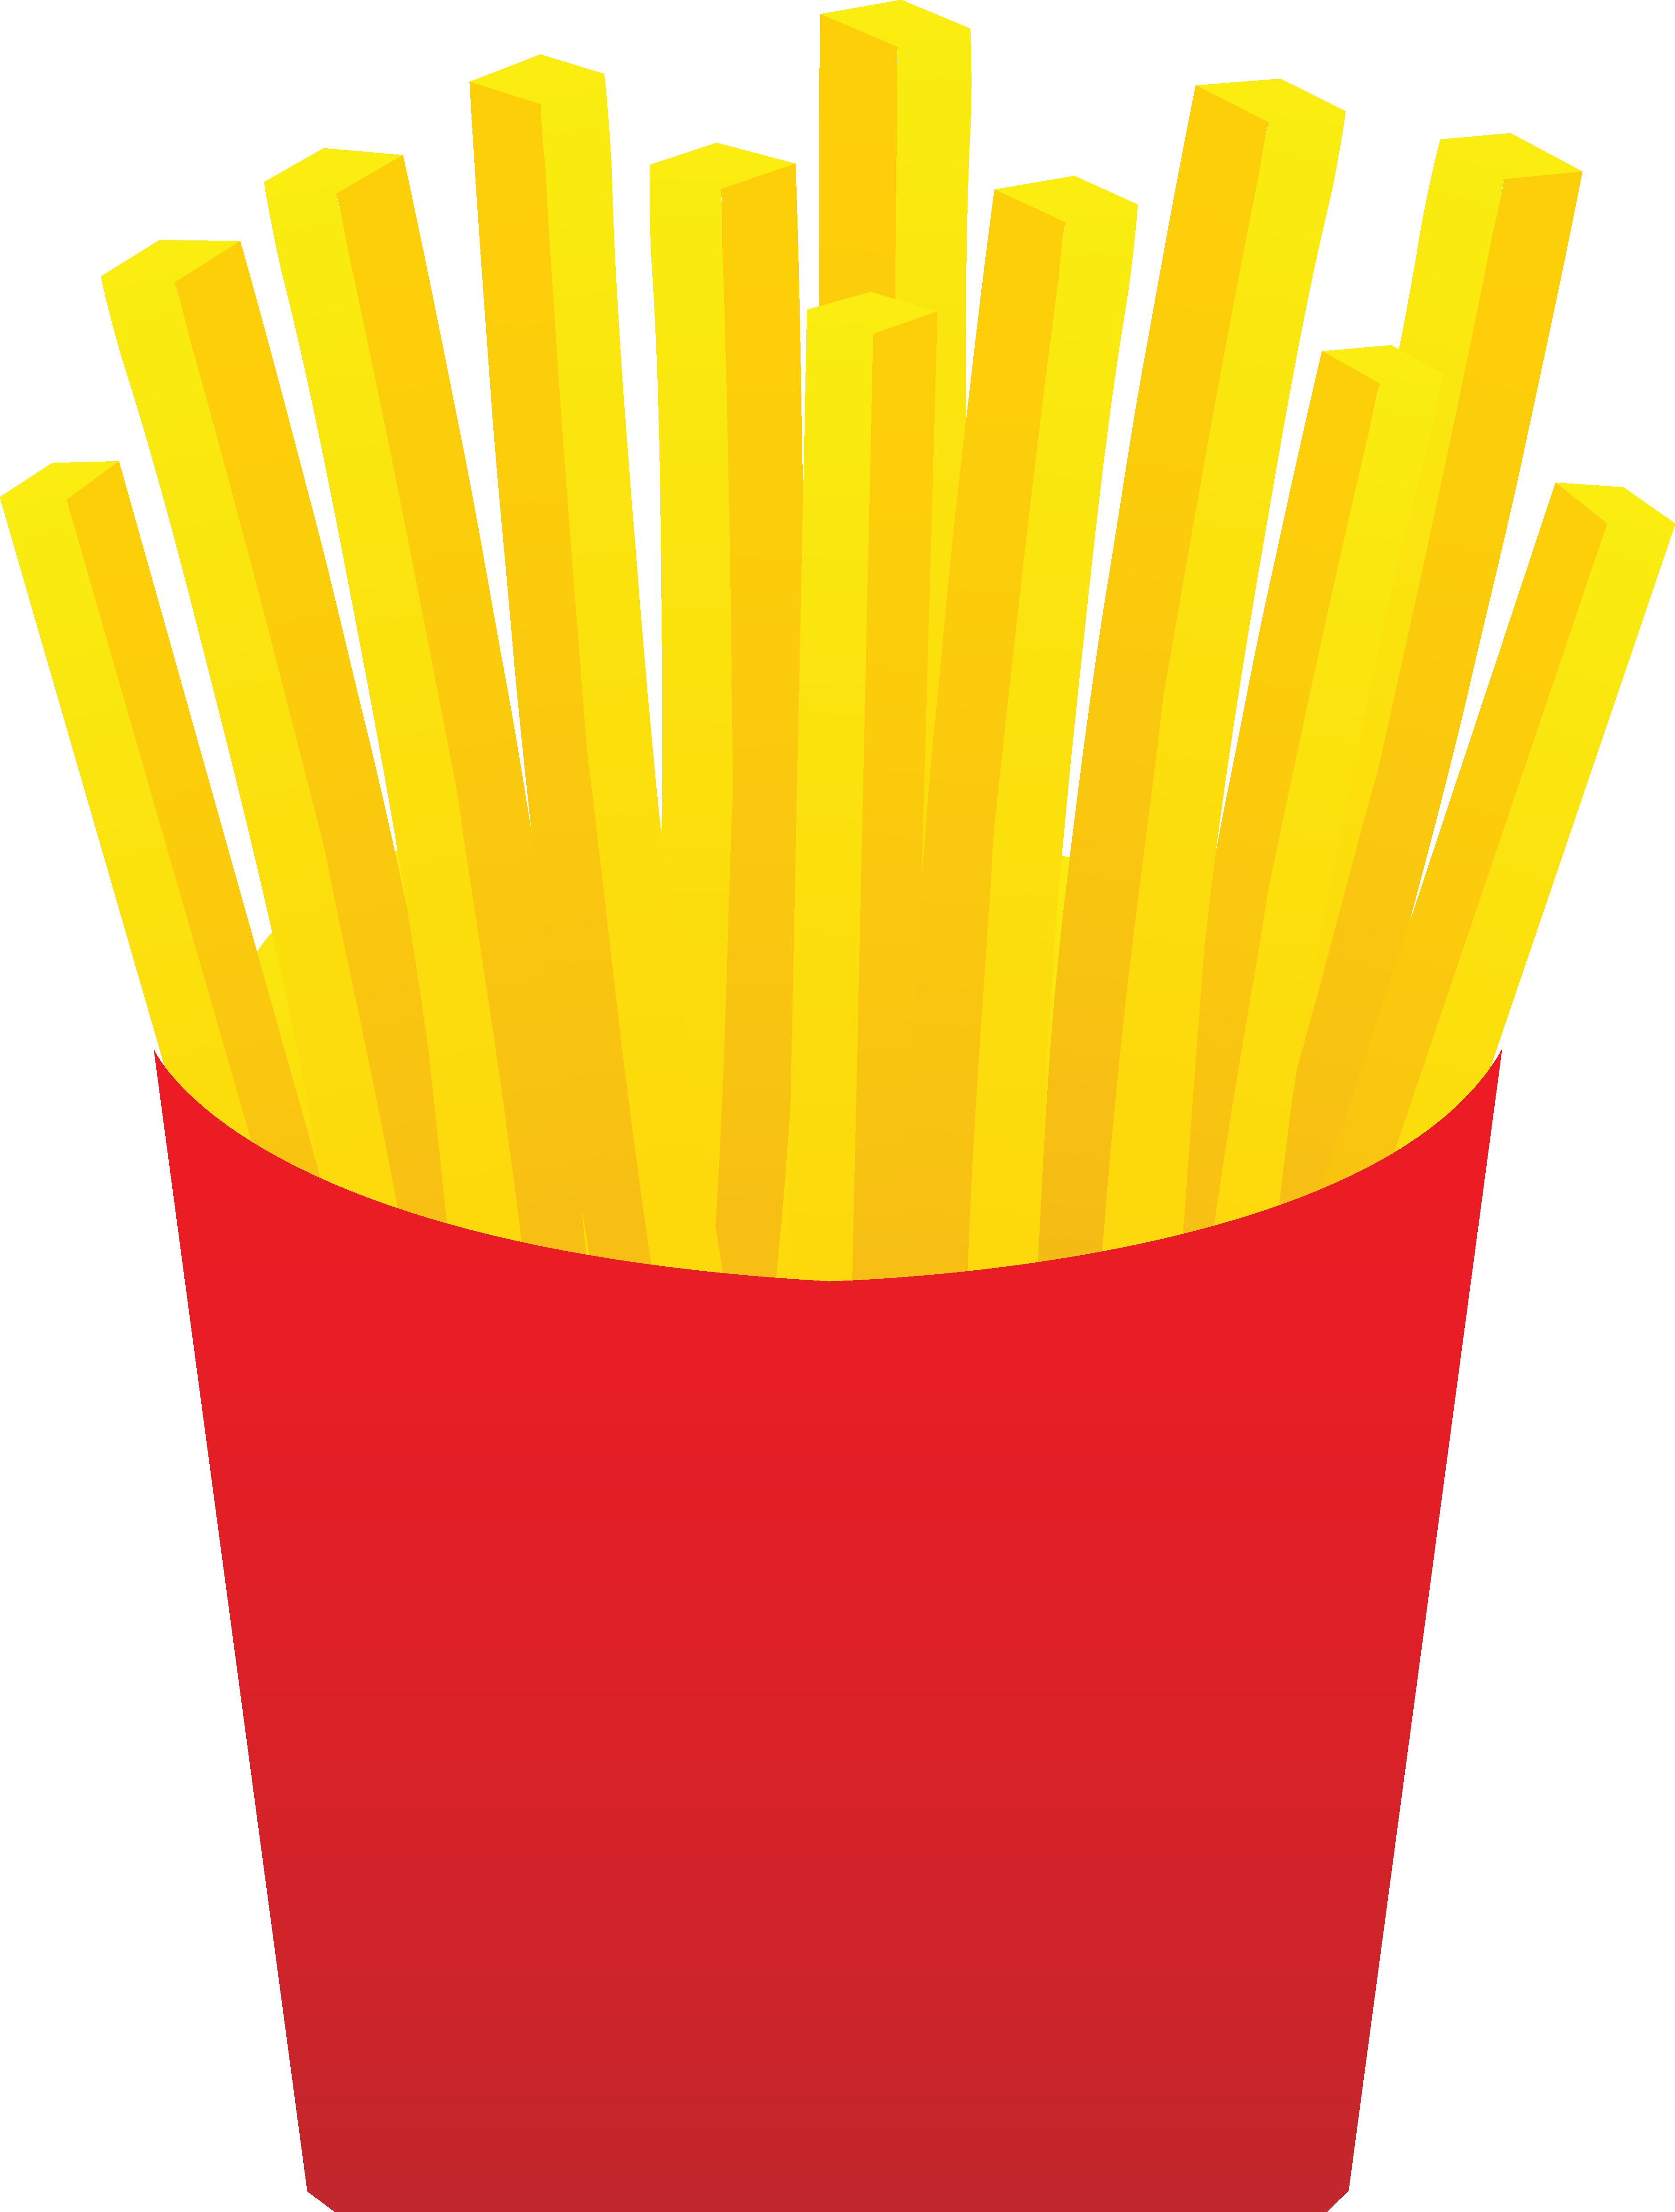 fries clipart sketches